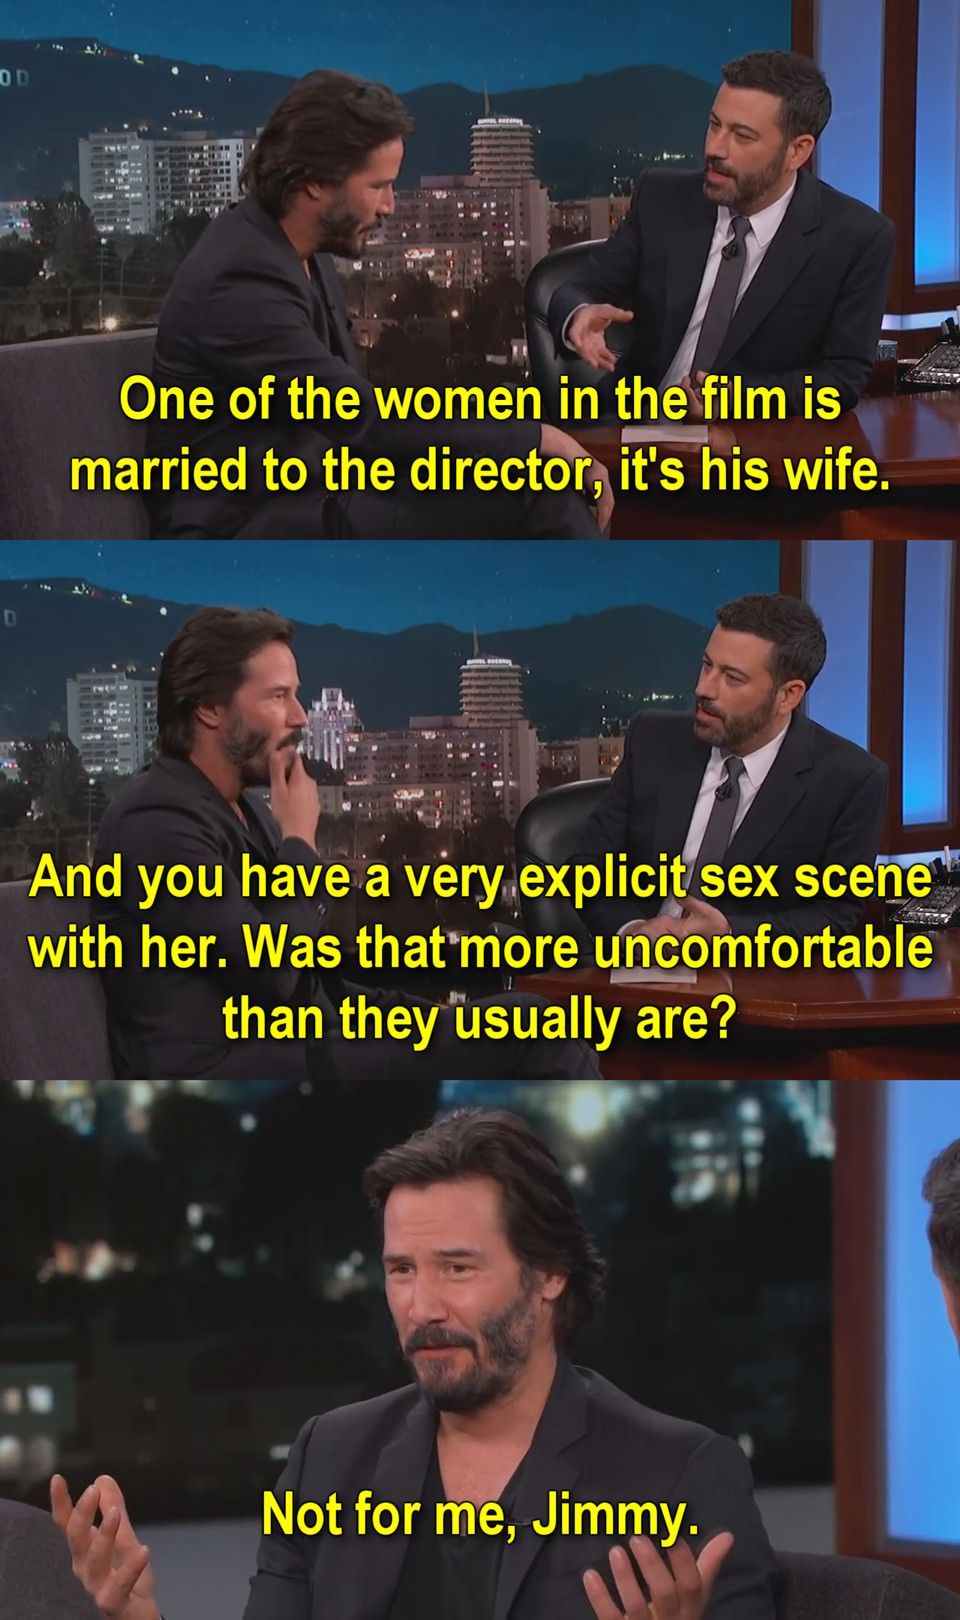 Keanu Reeves on his sex scene with the director's wife